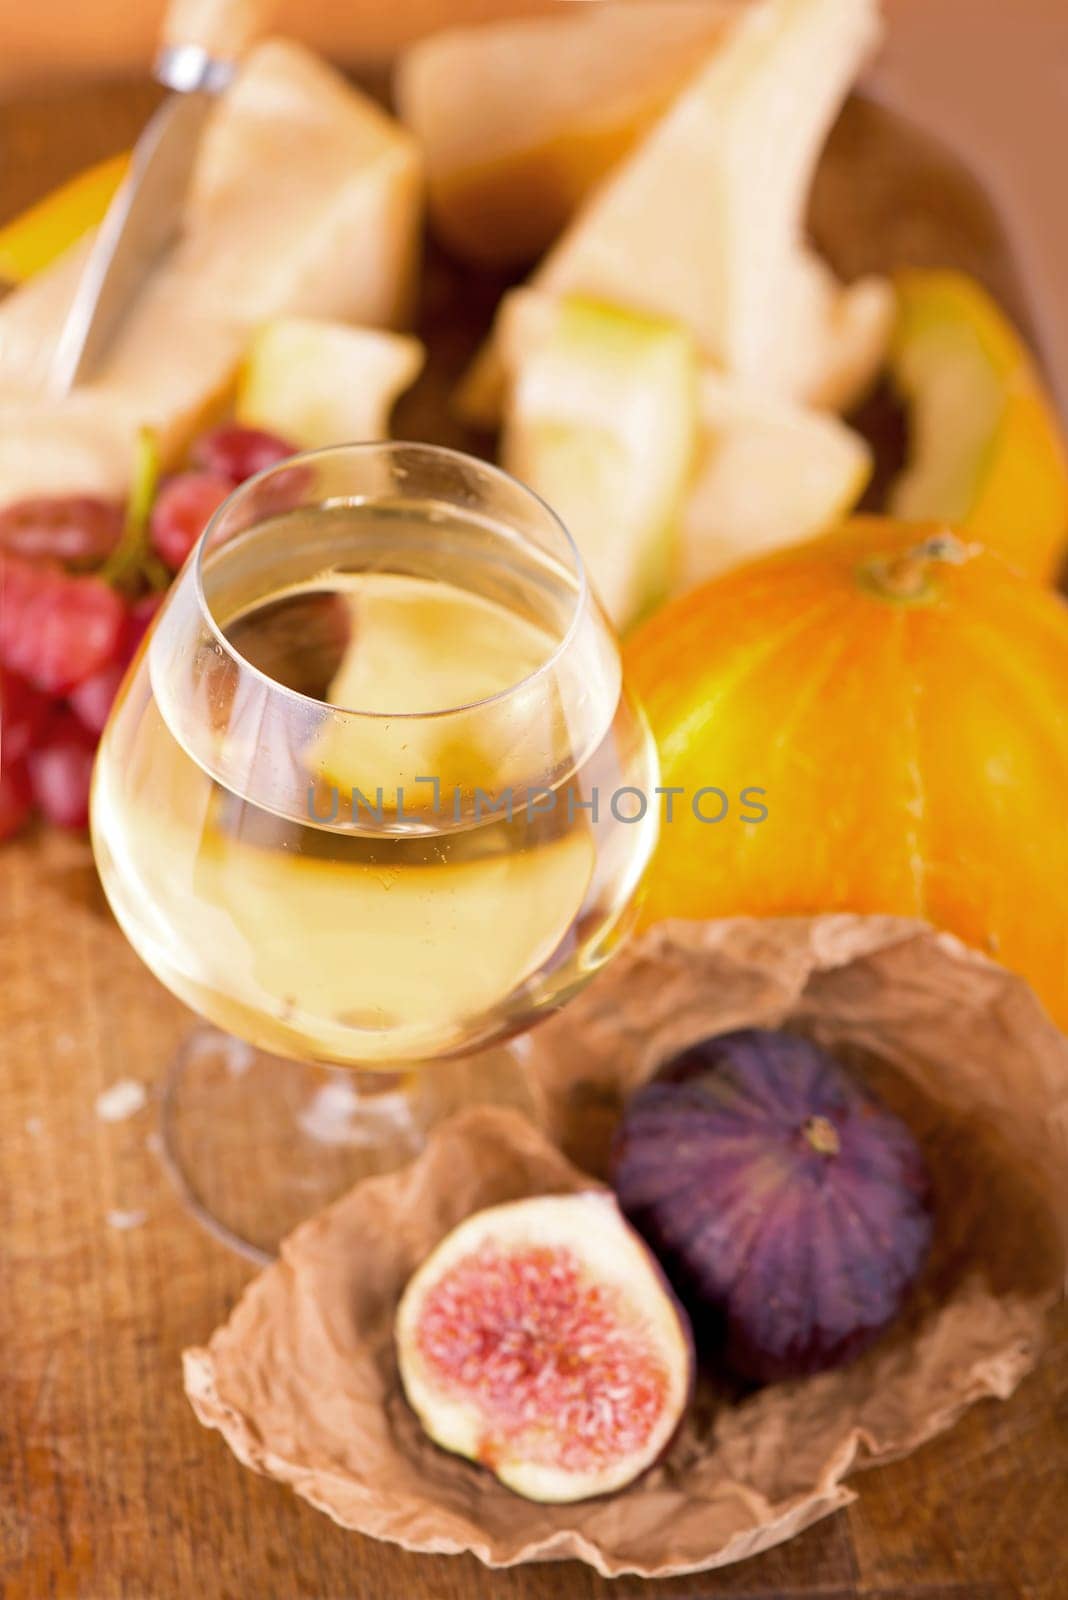 Cheese plate served with grapes, melon, figs, crackers, honey, nuts and white wine on a wooden table by aprilphoto